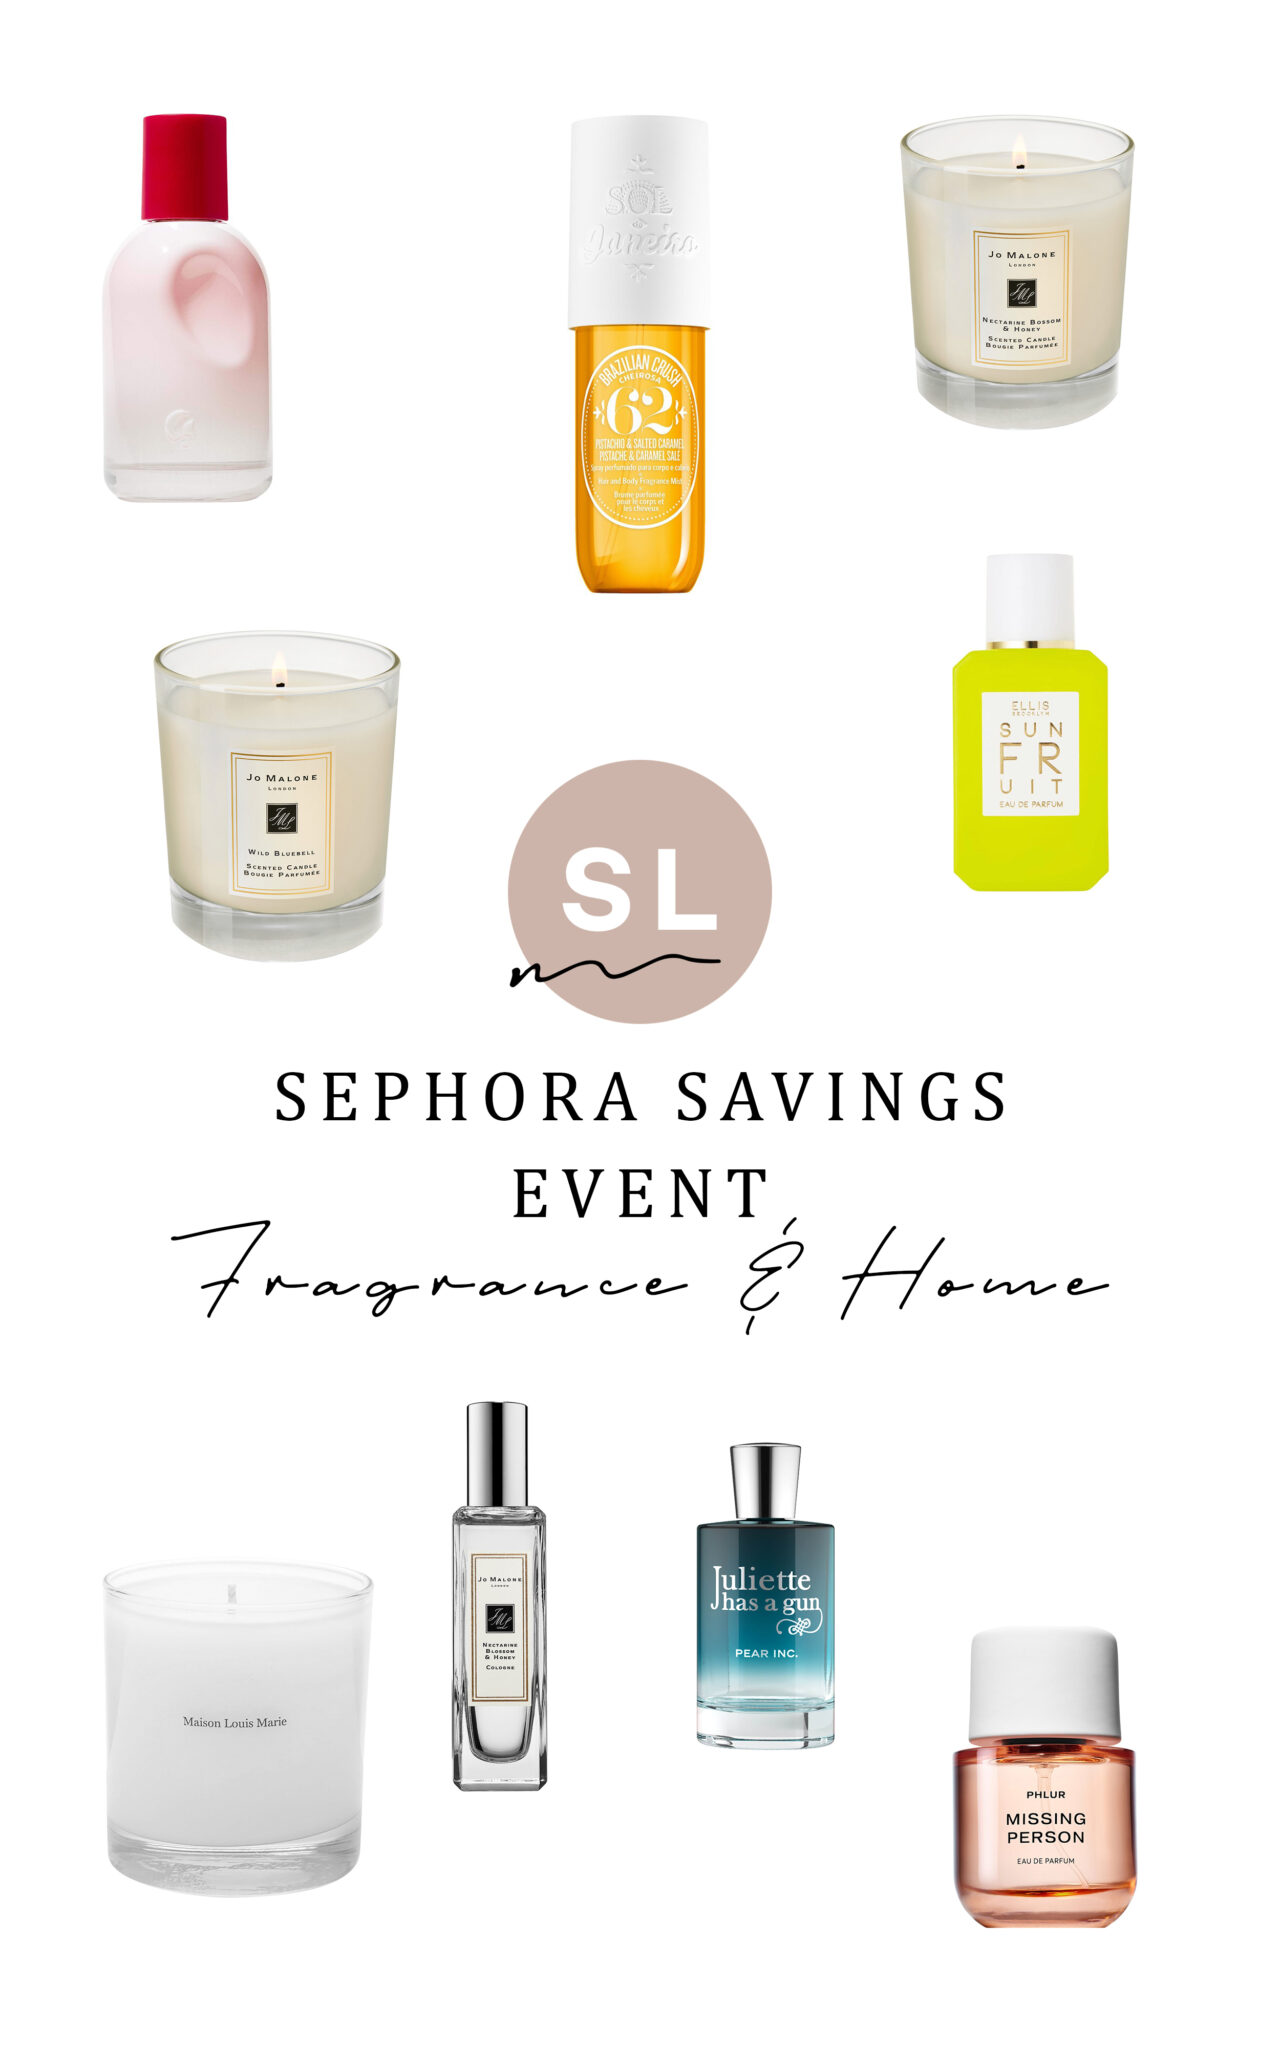 fragrance and home products from Sephora Savings Event